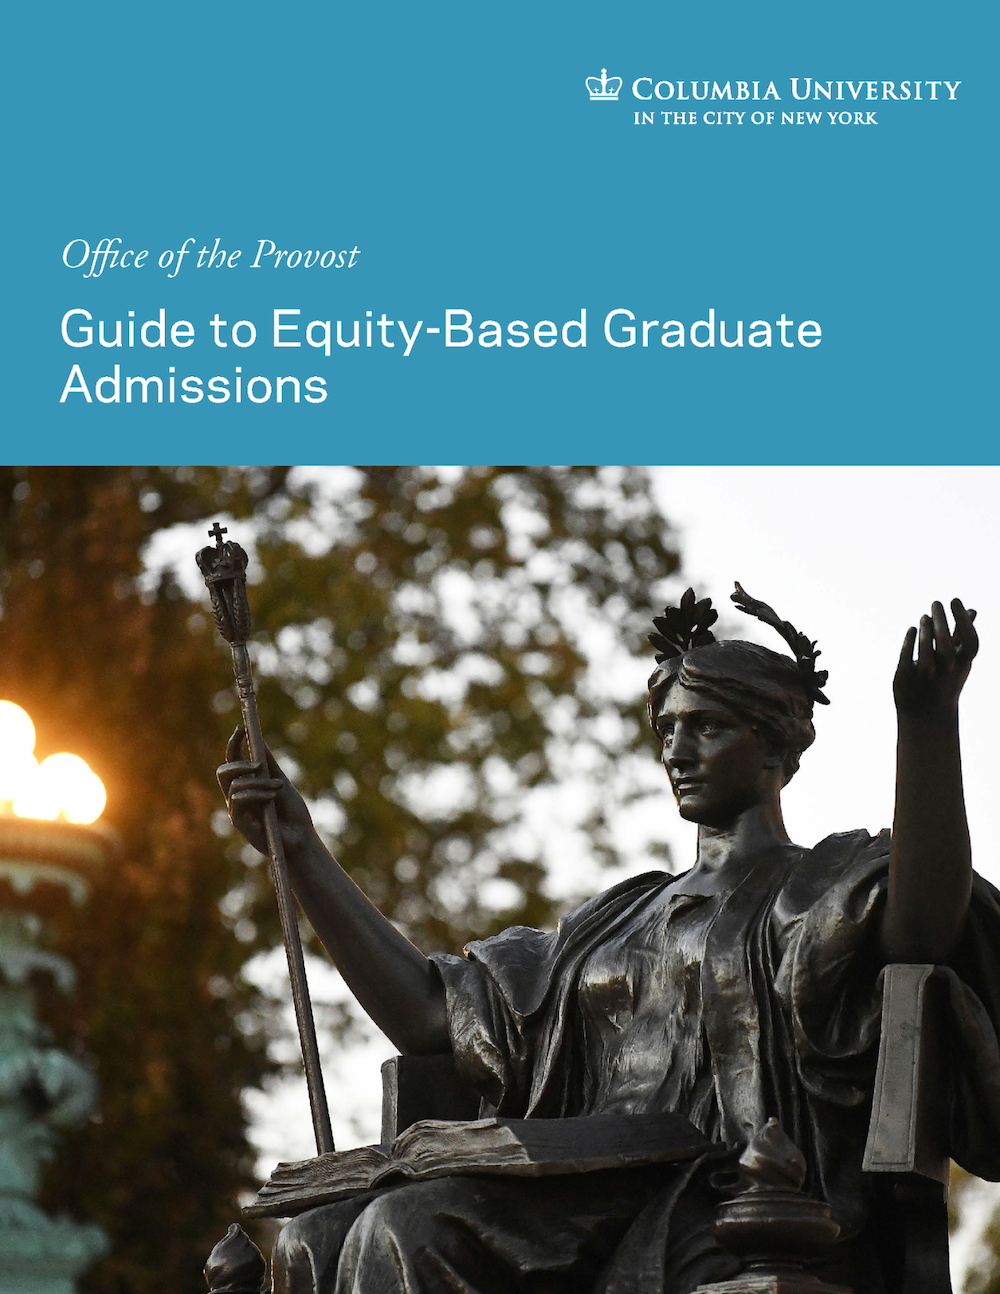 Cover of Guide to Equity-Based Graduate Admissions with photo of Alma Mater